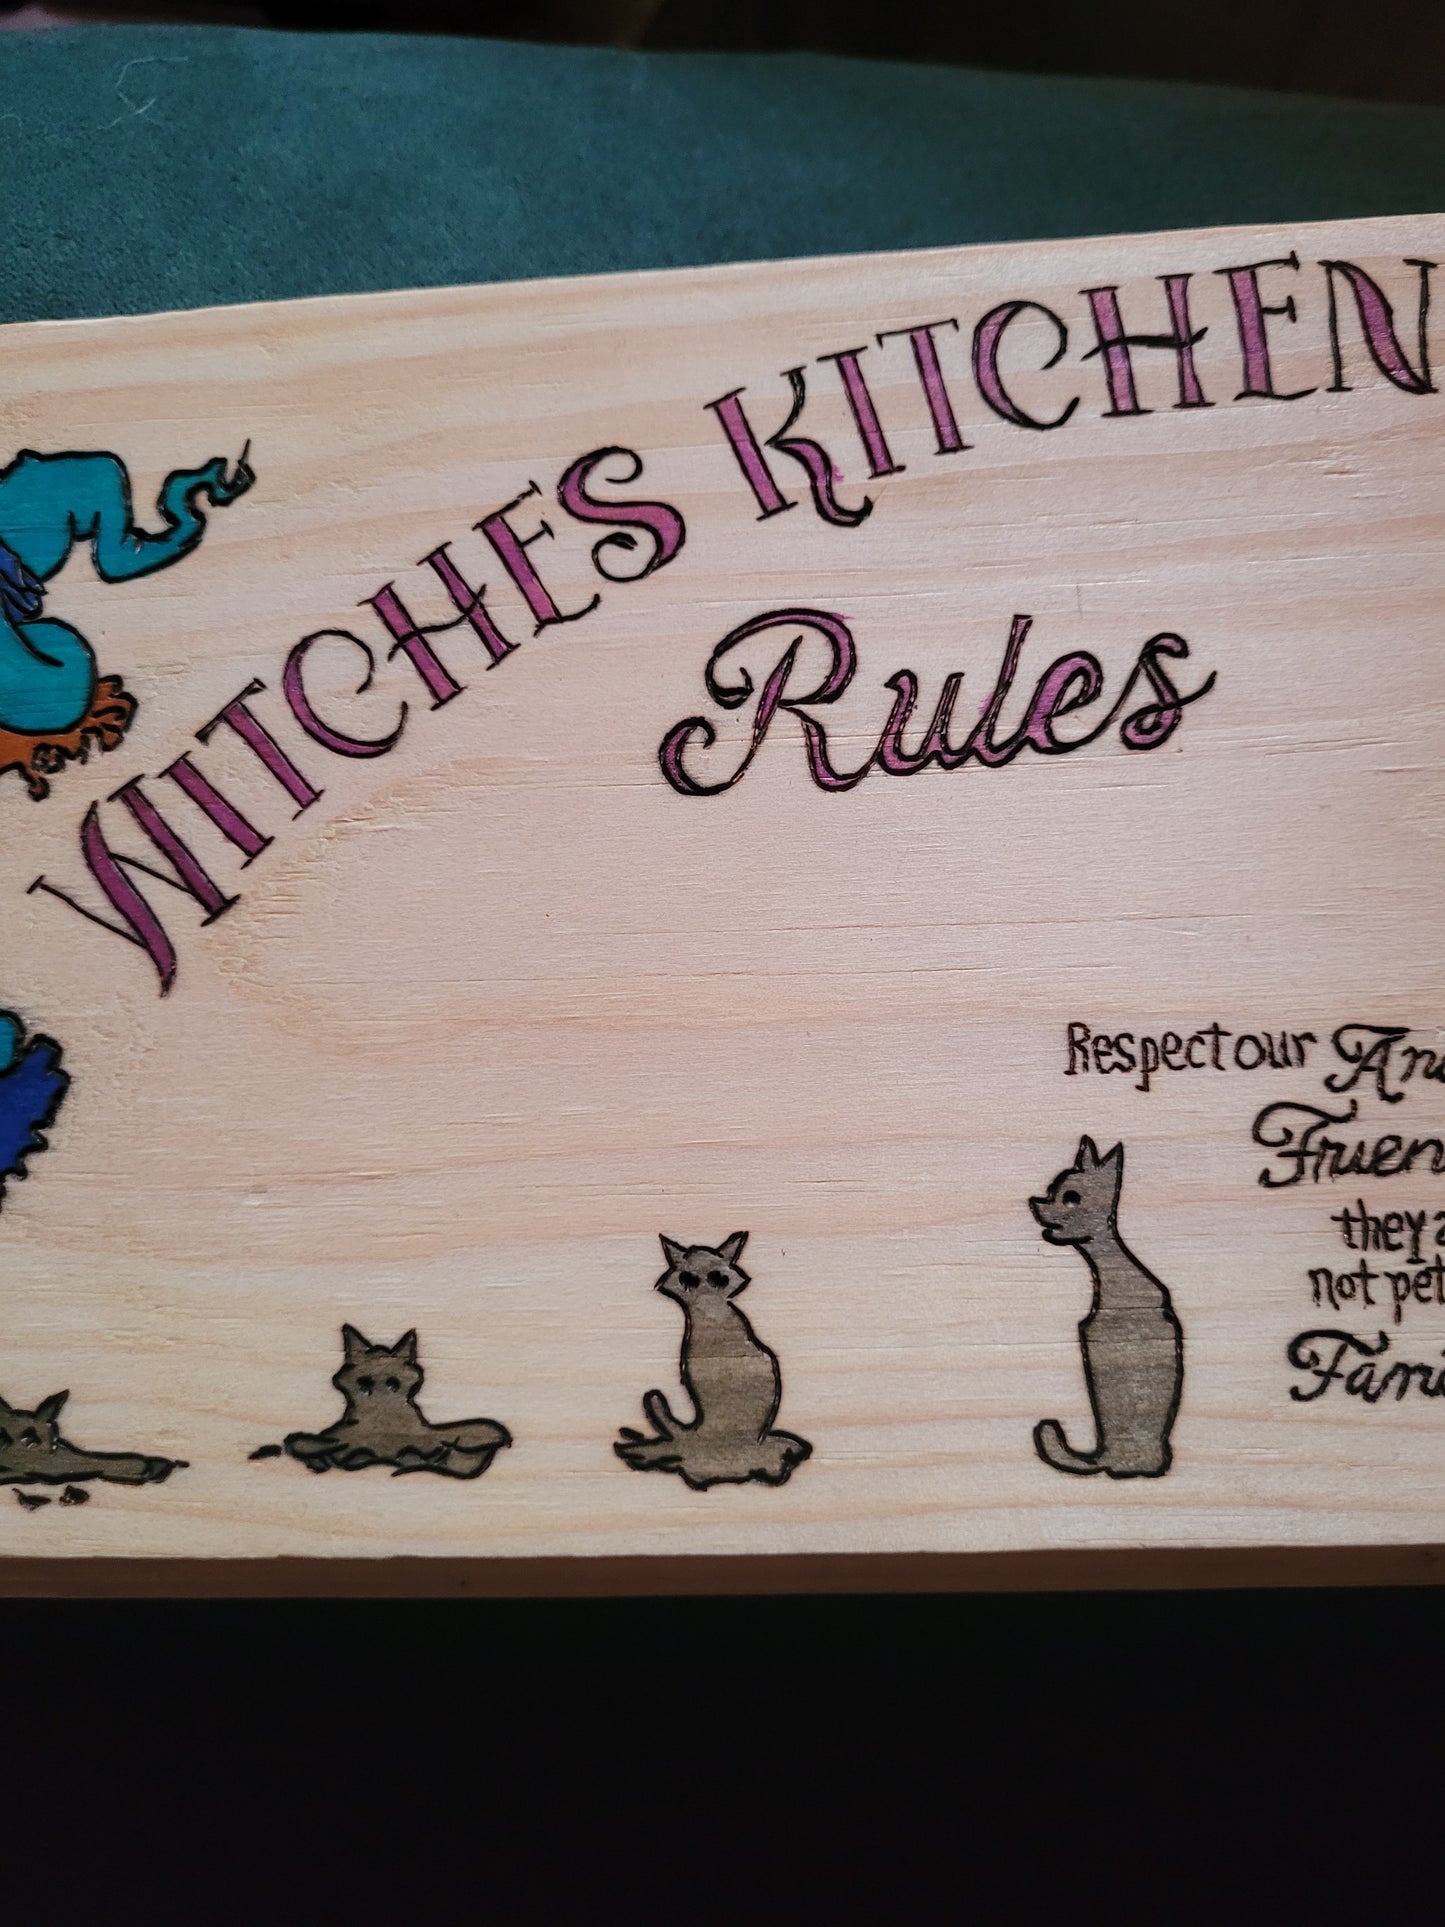 Witches Kitchen Rules - 'Pyrographics by The Ragdoll Princess'